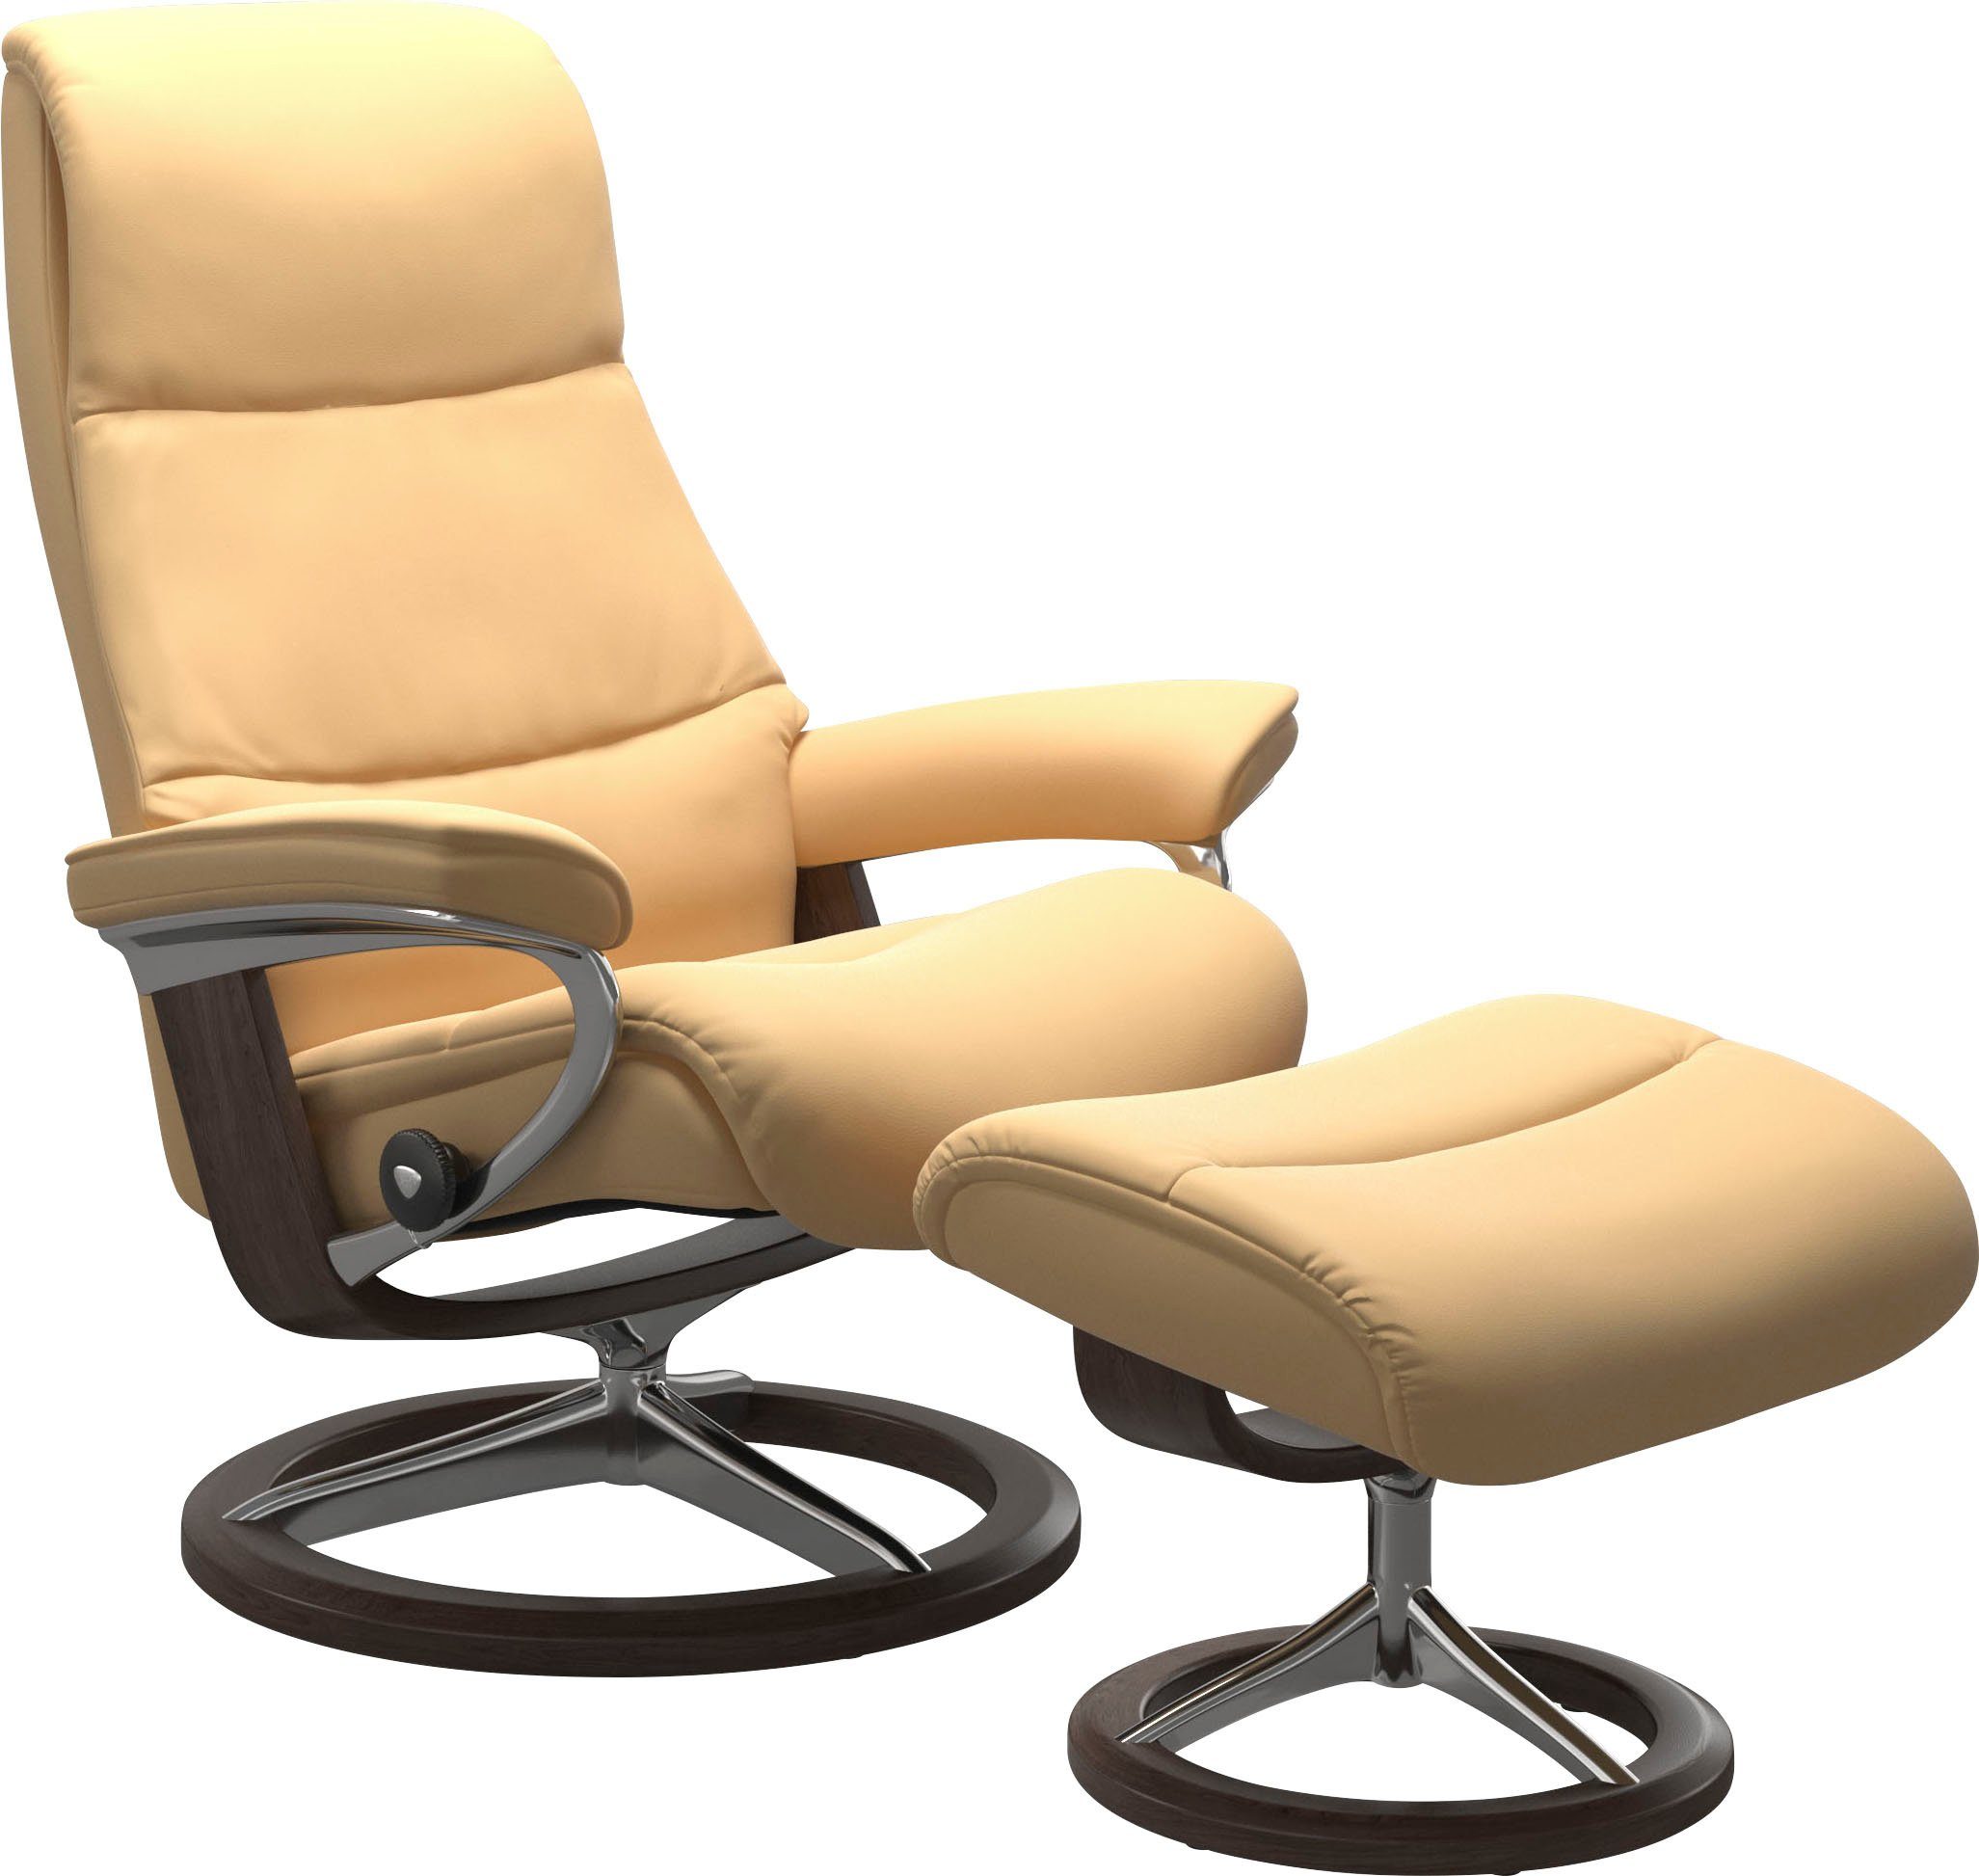 Stressless® Relaxsessel View, mit Signature Base, Größe L,Gestell Wenge | Funktionssessel